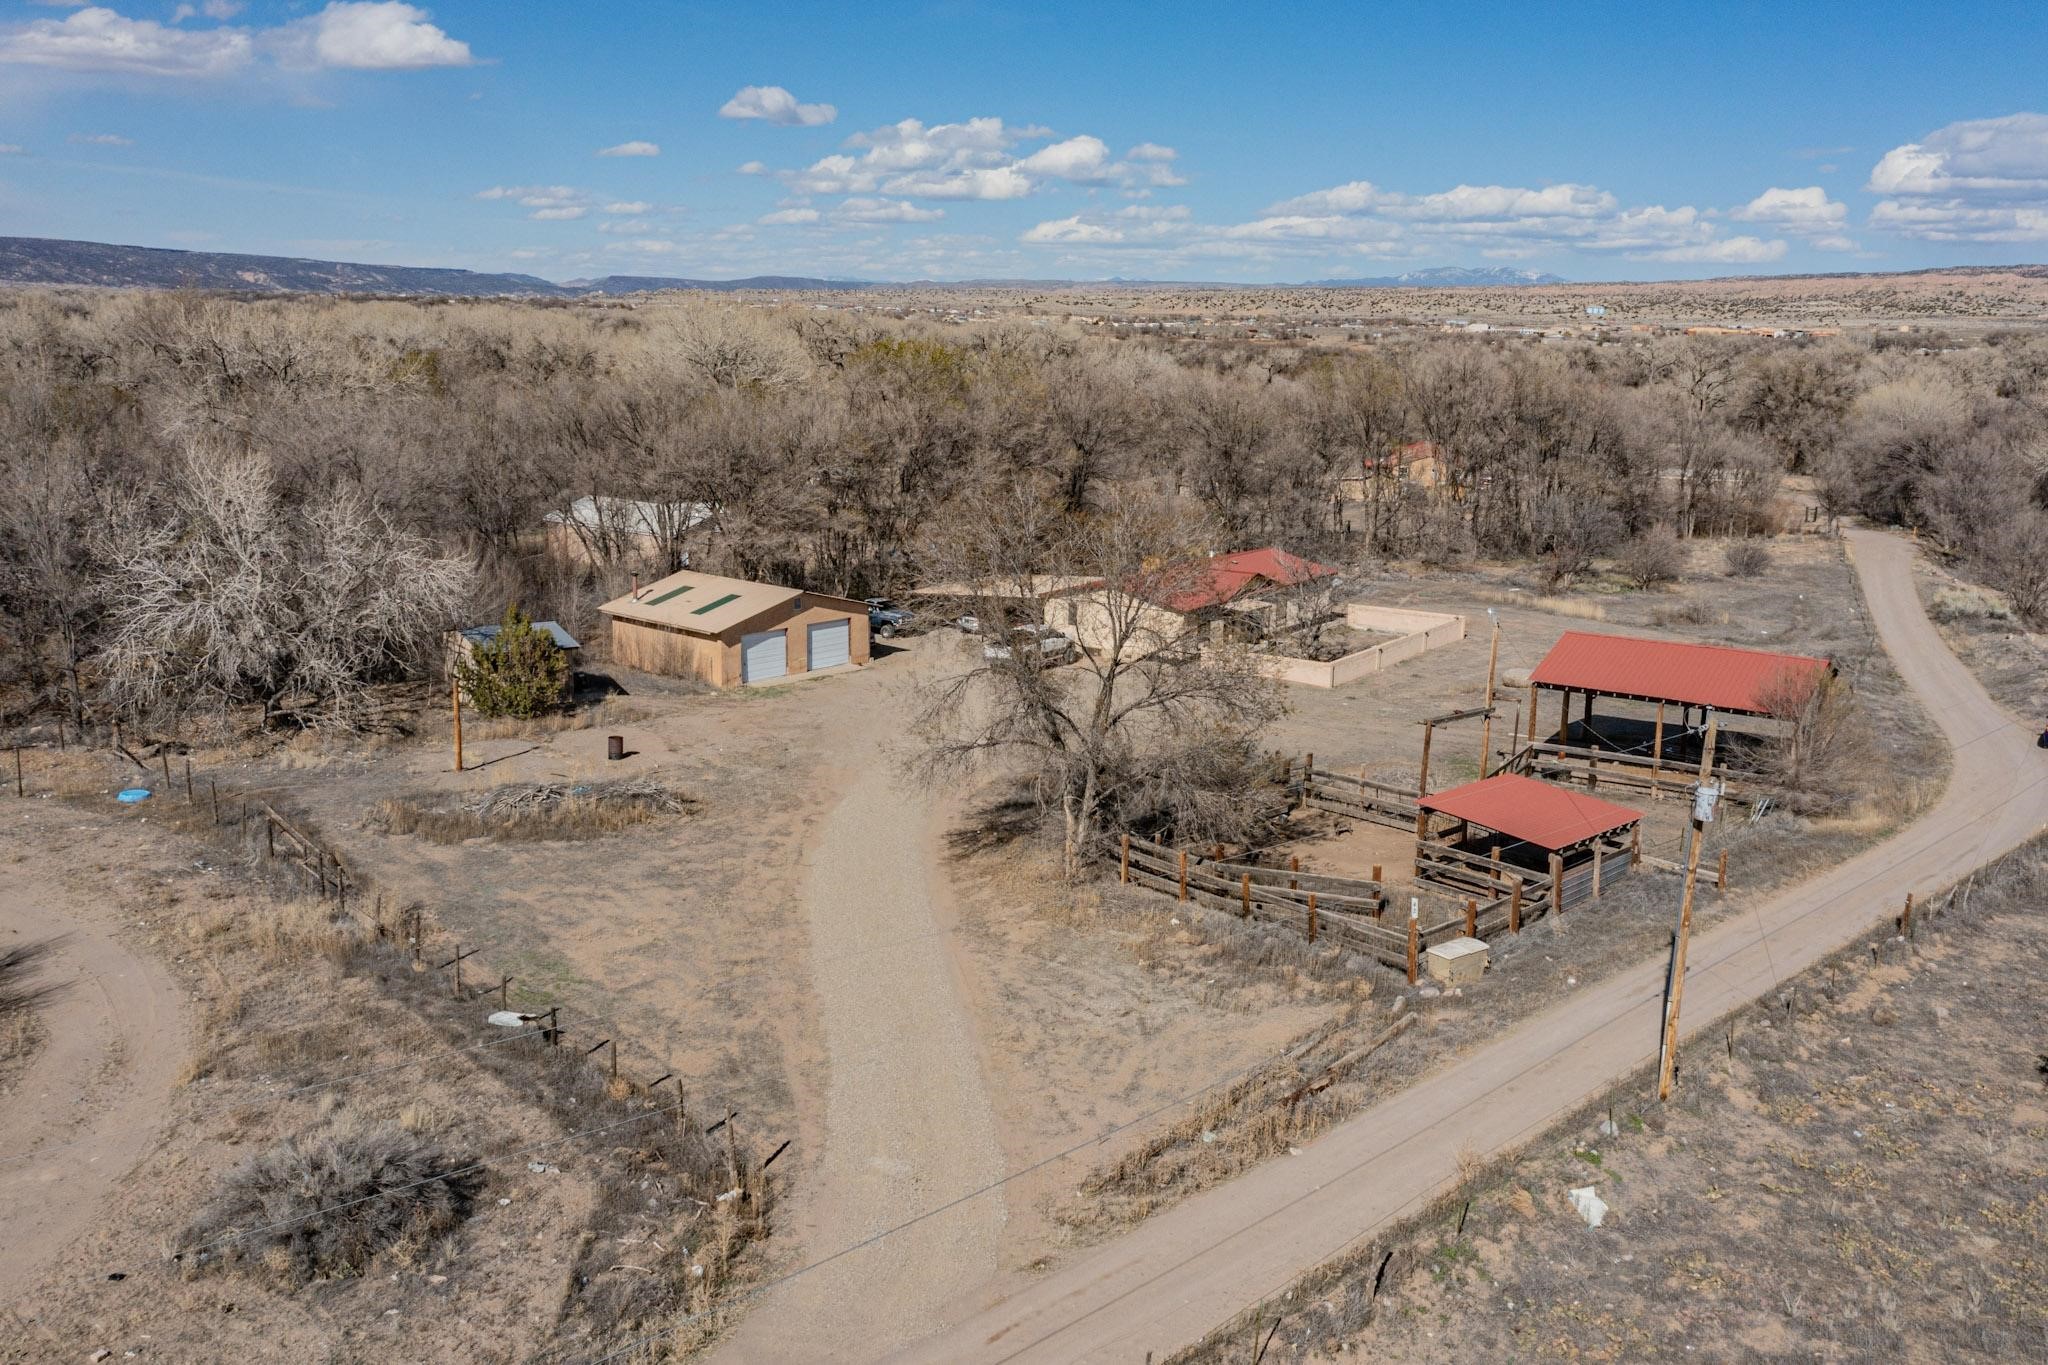 42 Private 1505 Drive, Espanola, New Mexico 87532, 3 Bedrooms Bedrooms, ,2 BathroomsBathrooms,Residential,For Sale,42 Private 1505 Drive,202401224